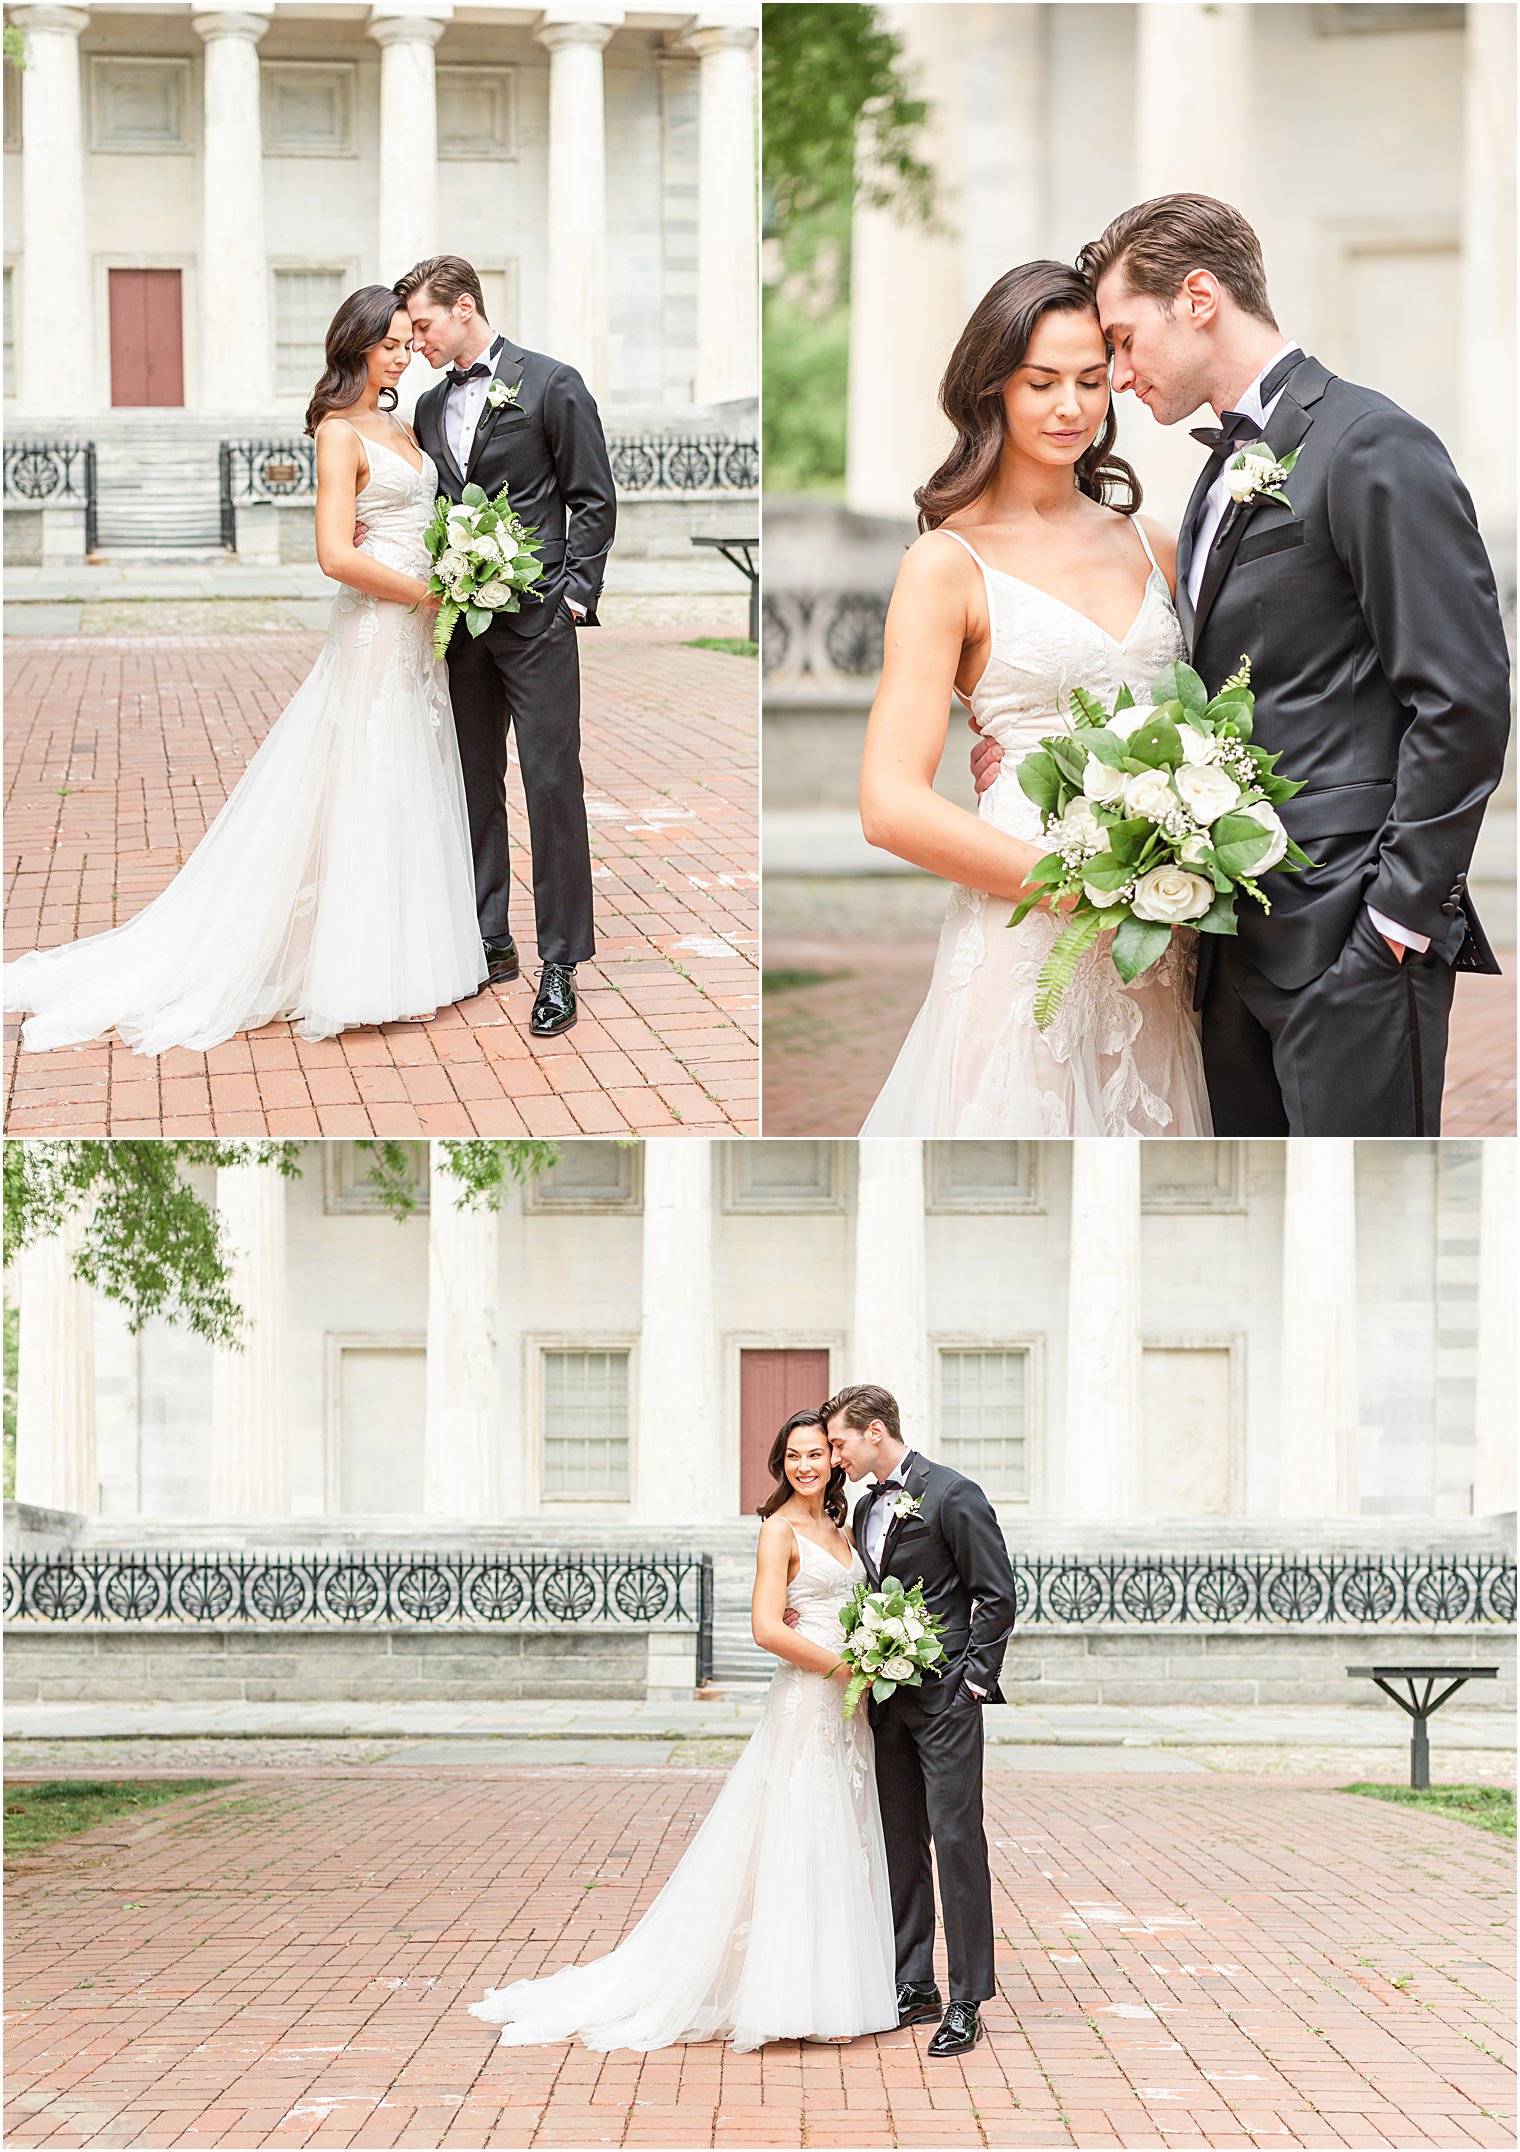 Bride + Groom portraits before wedding ceremony in front of white building